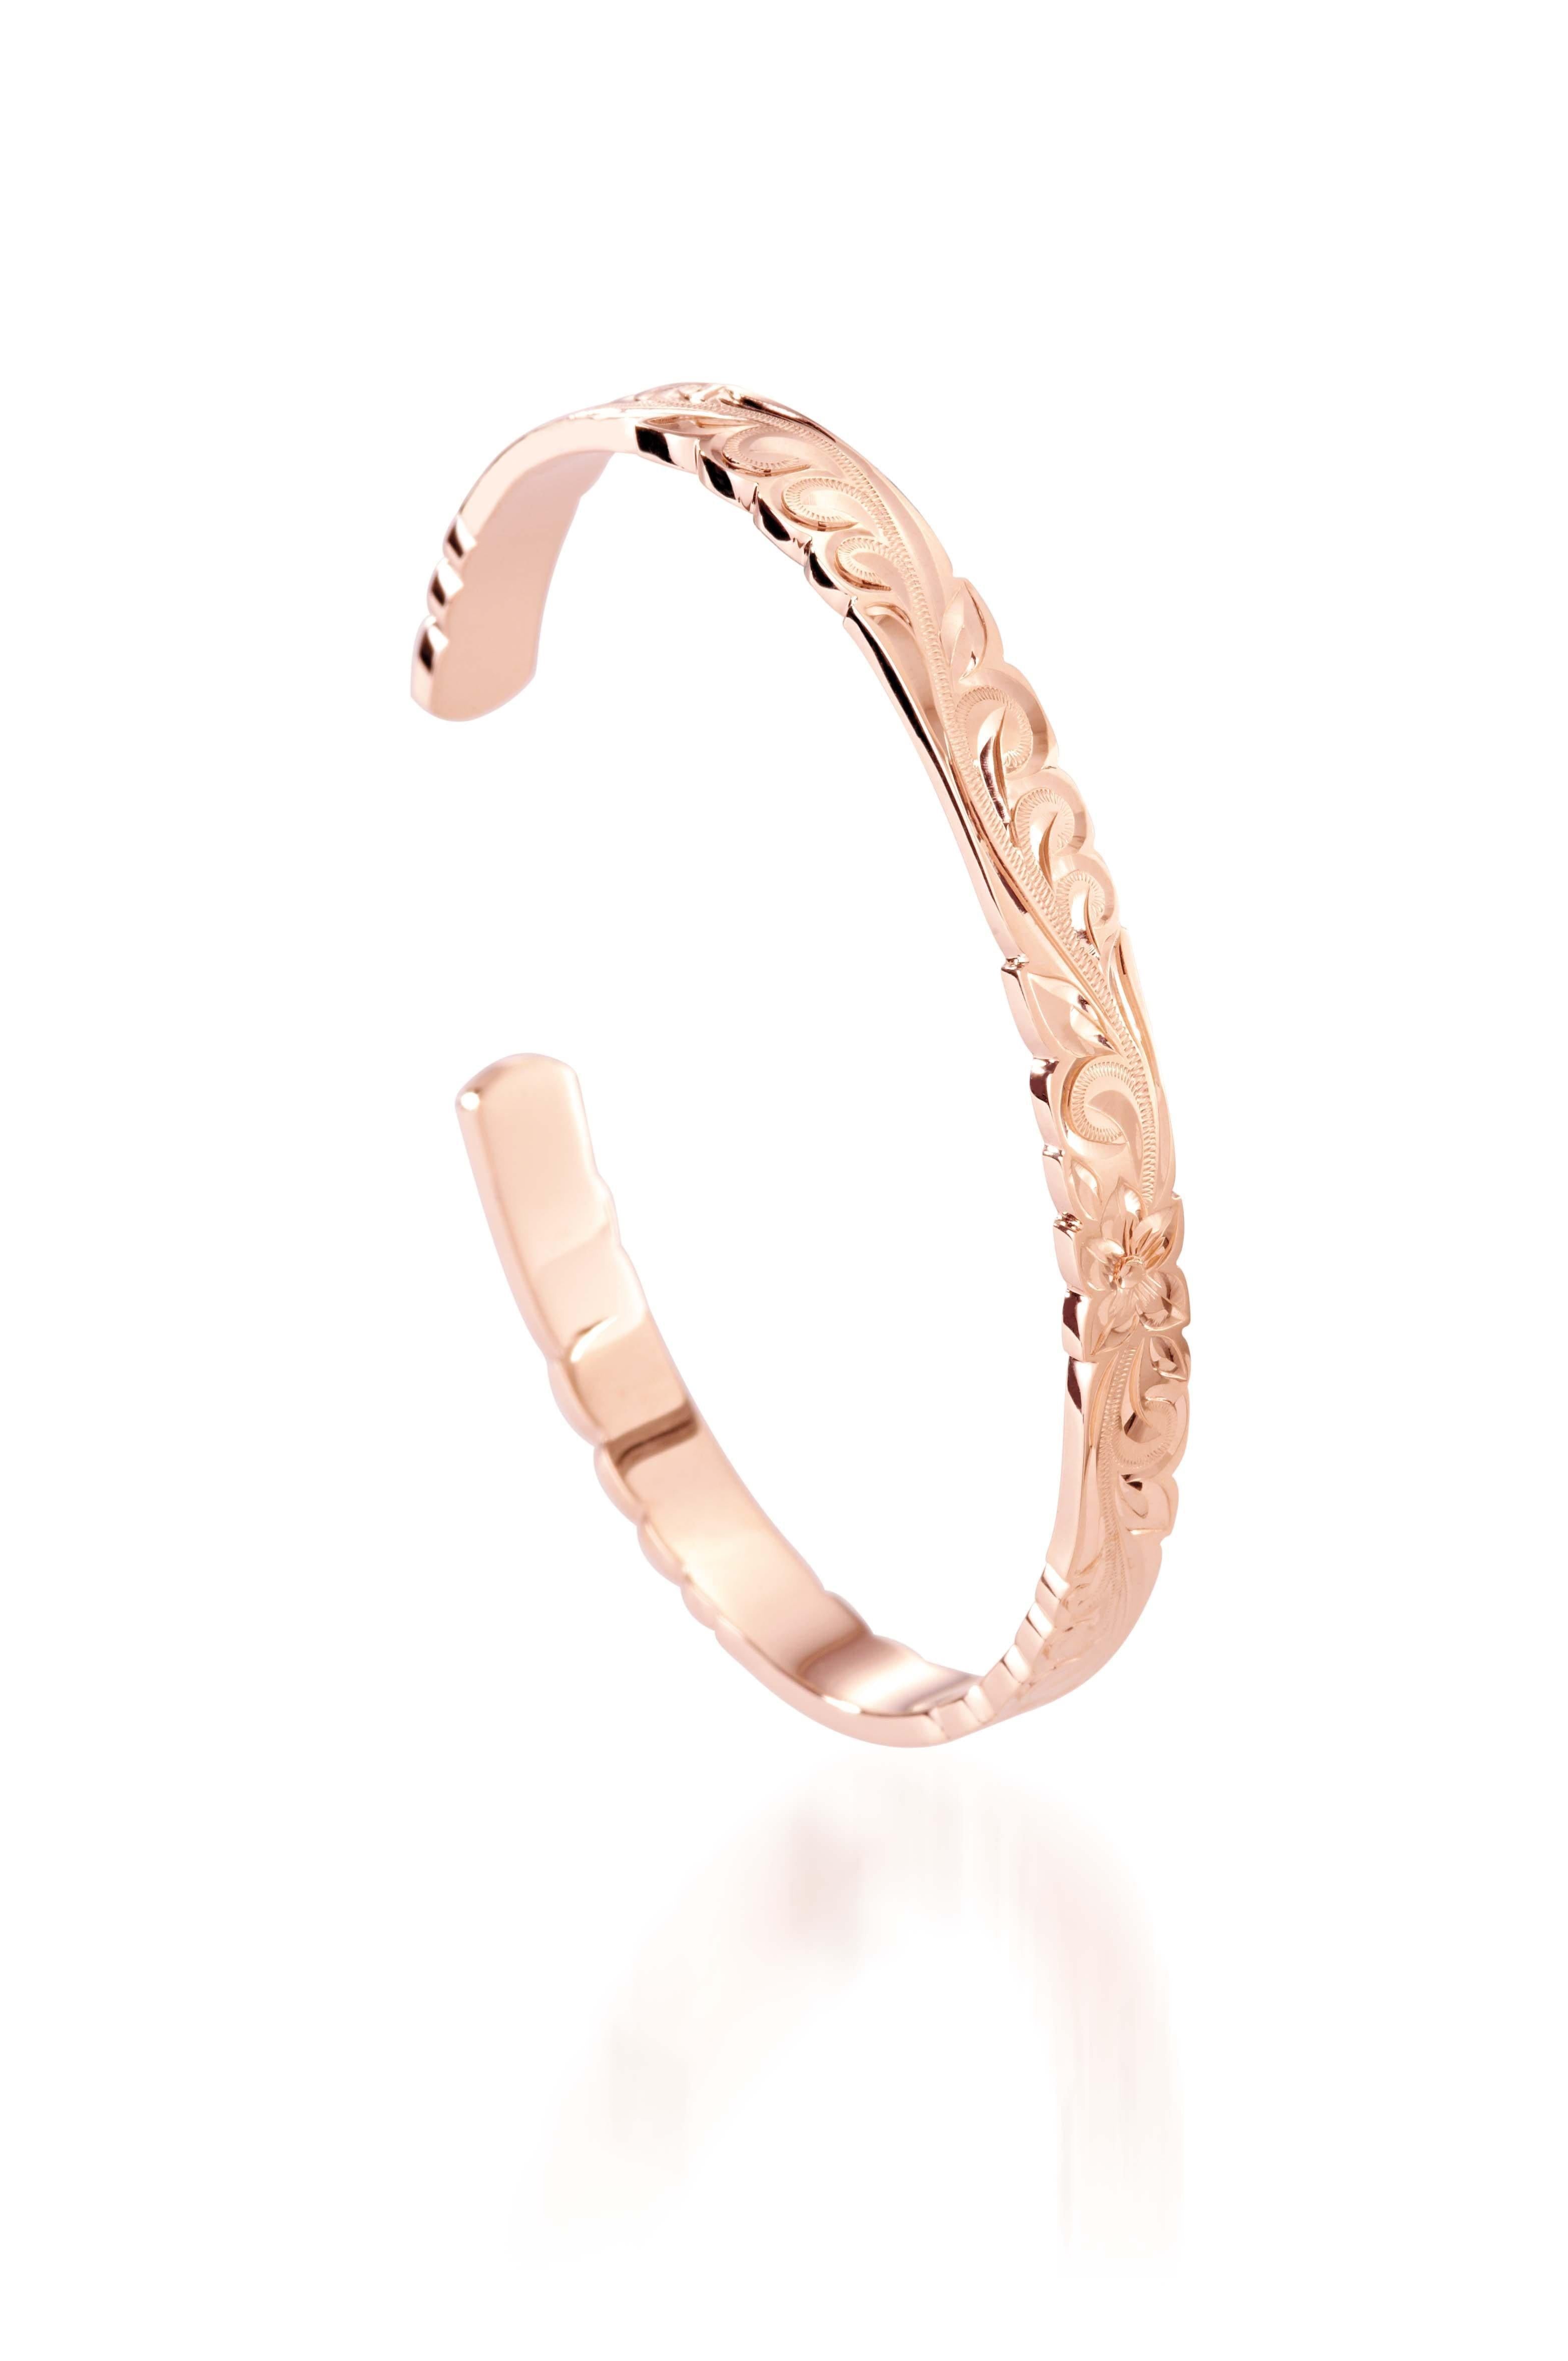 The picture shows a 14K rose gold cut-out bangle with plumeria engraving.